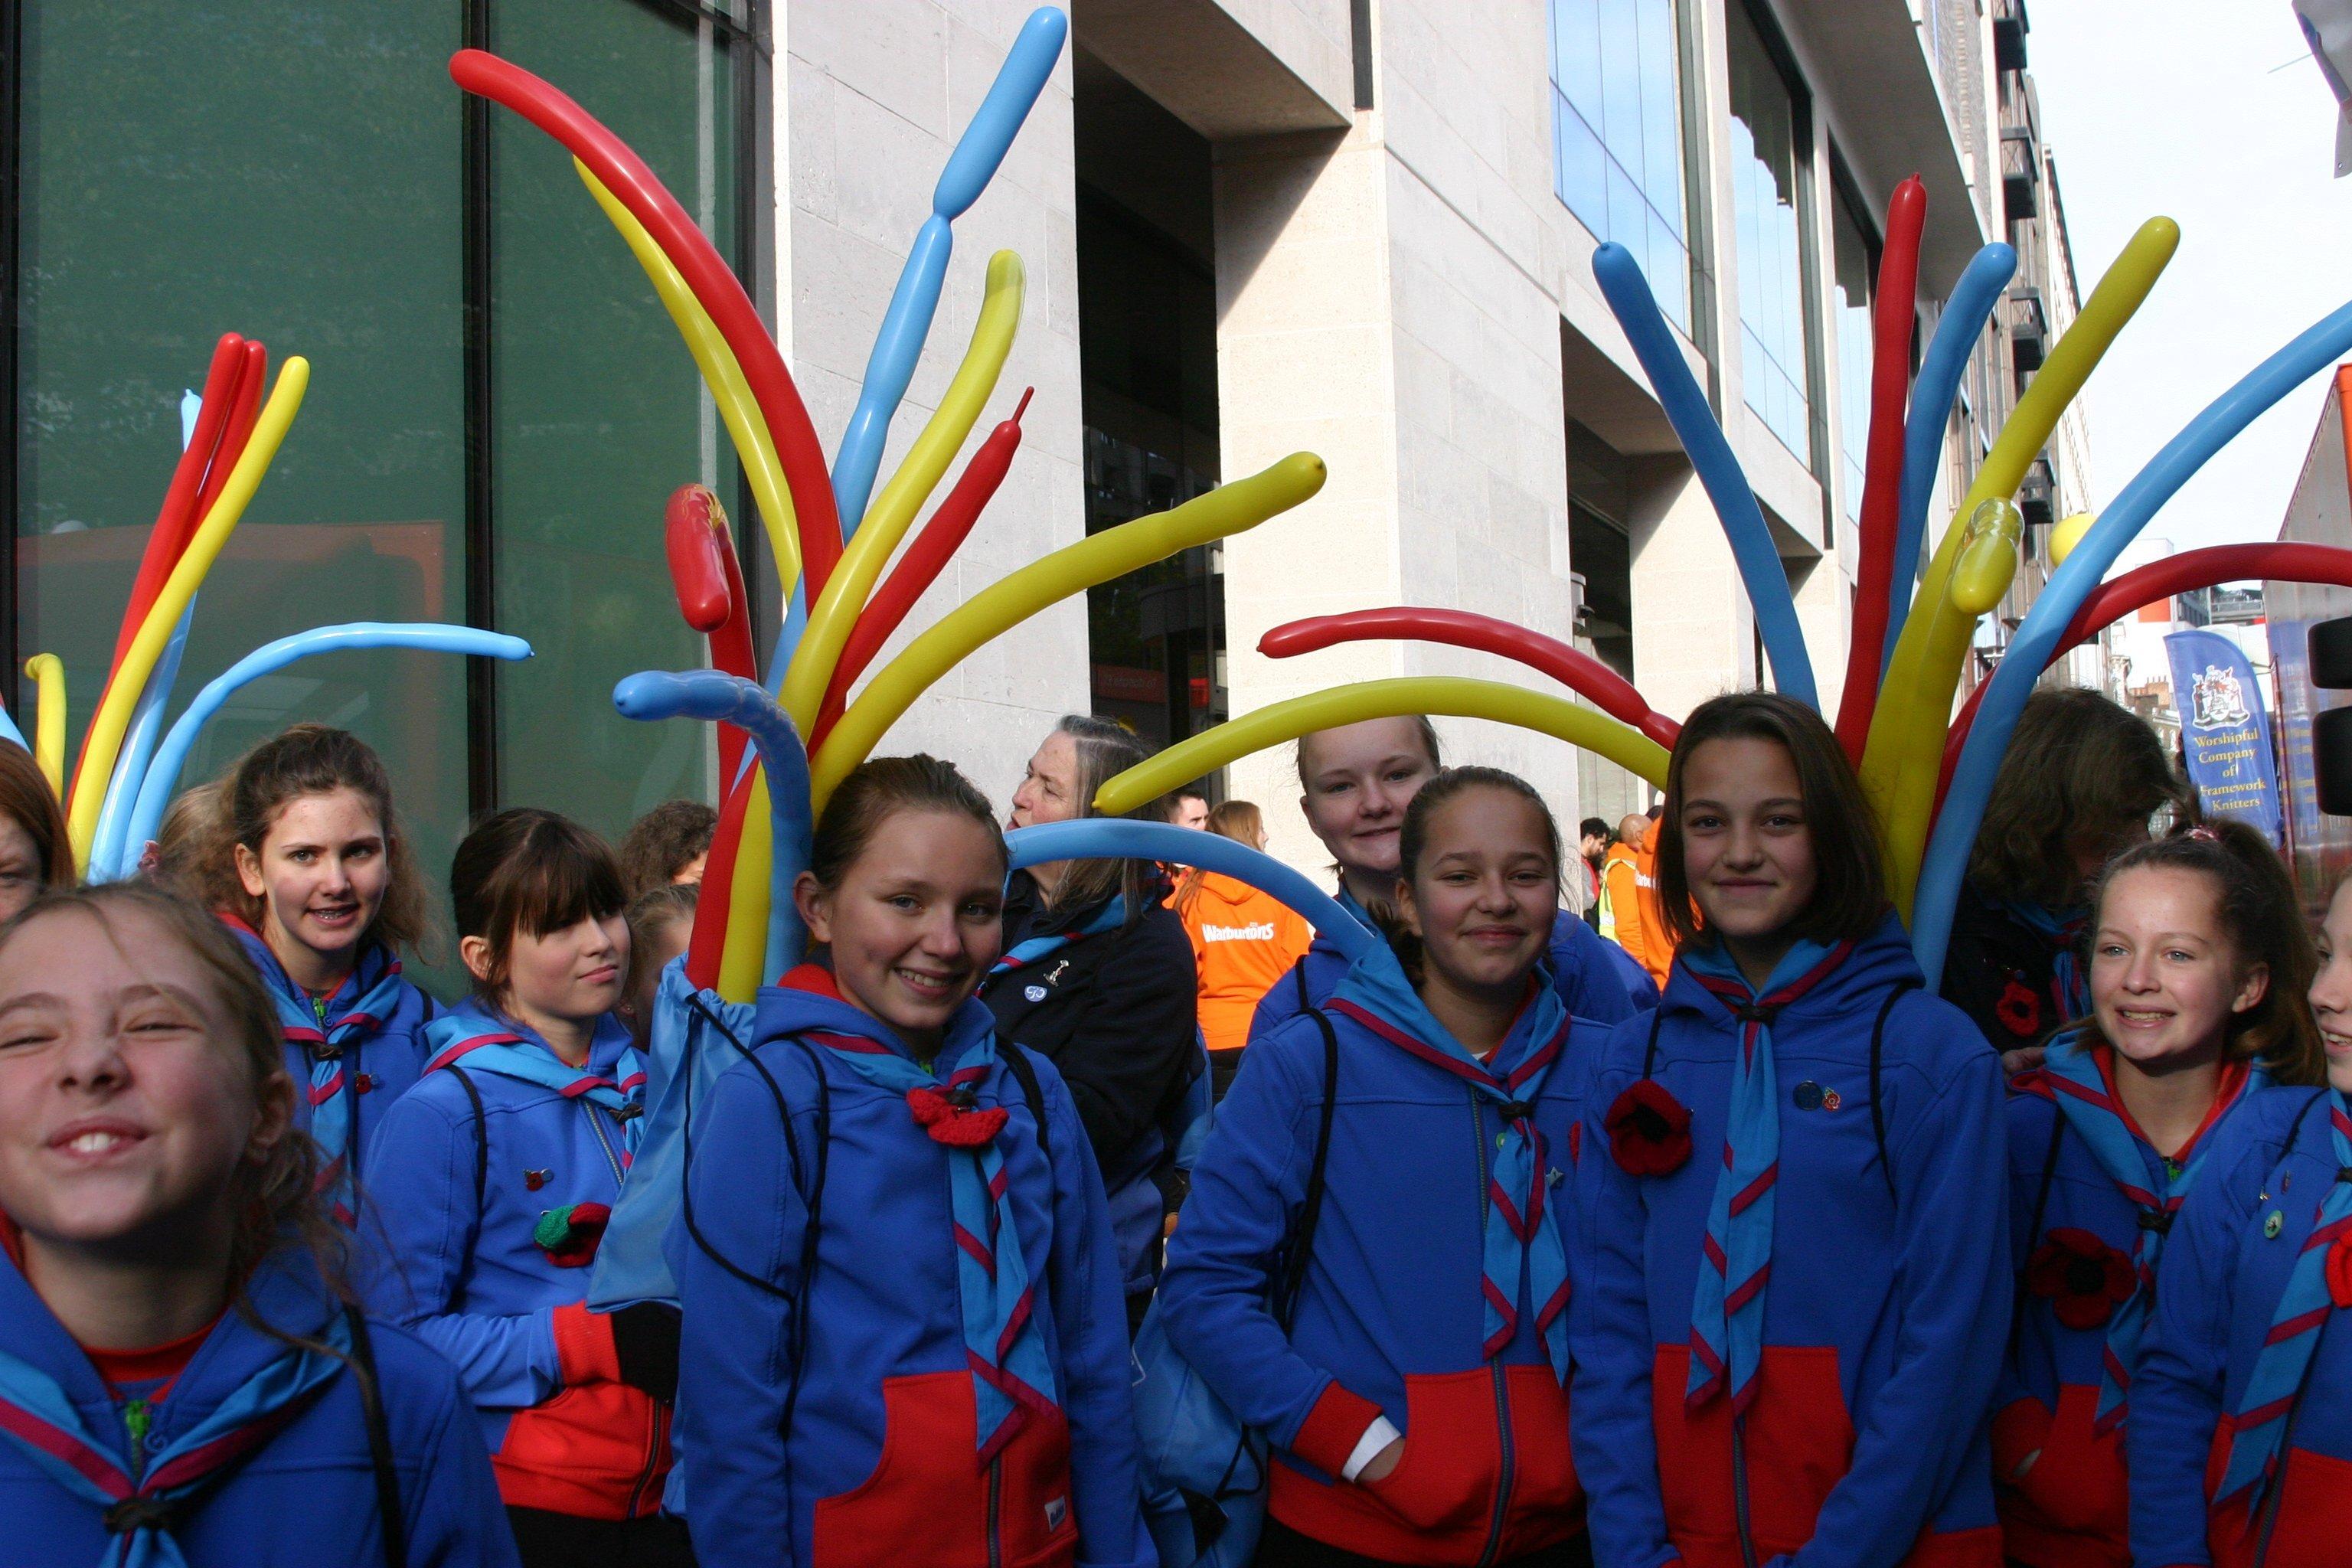 On Saturday 9th November 46 members of Girlguiding Sussex Central county took part in this year's Lord Mayor's Show in London. SUS-191118-125703001